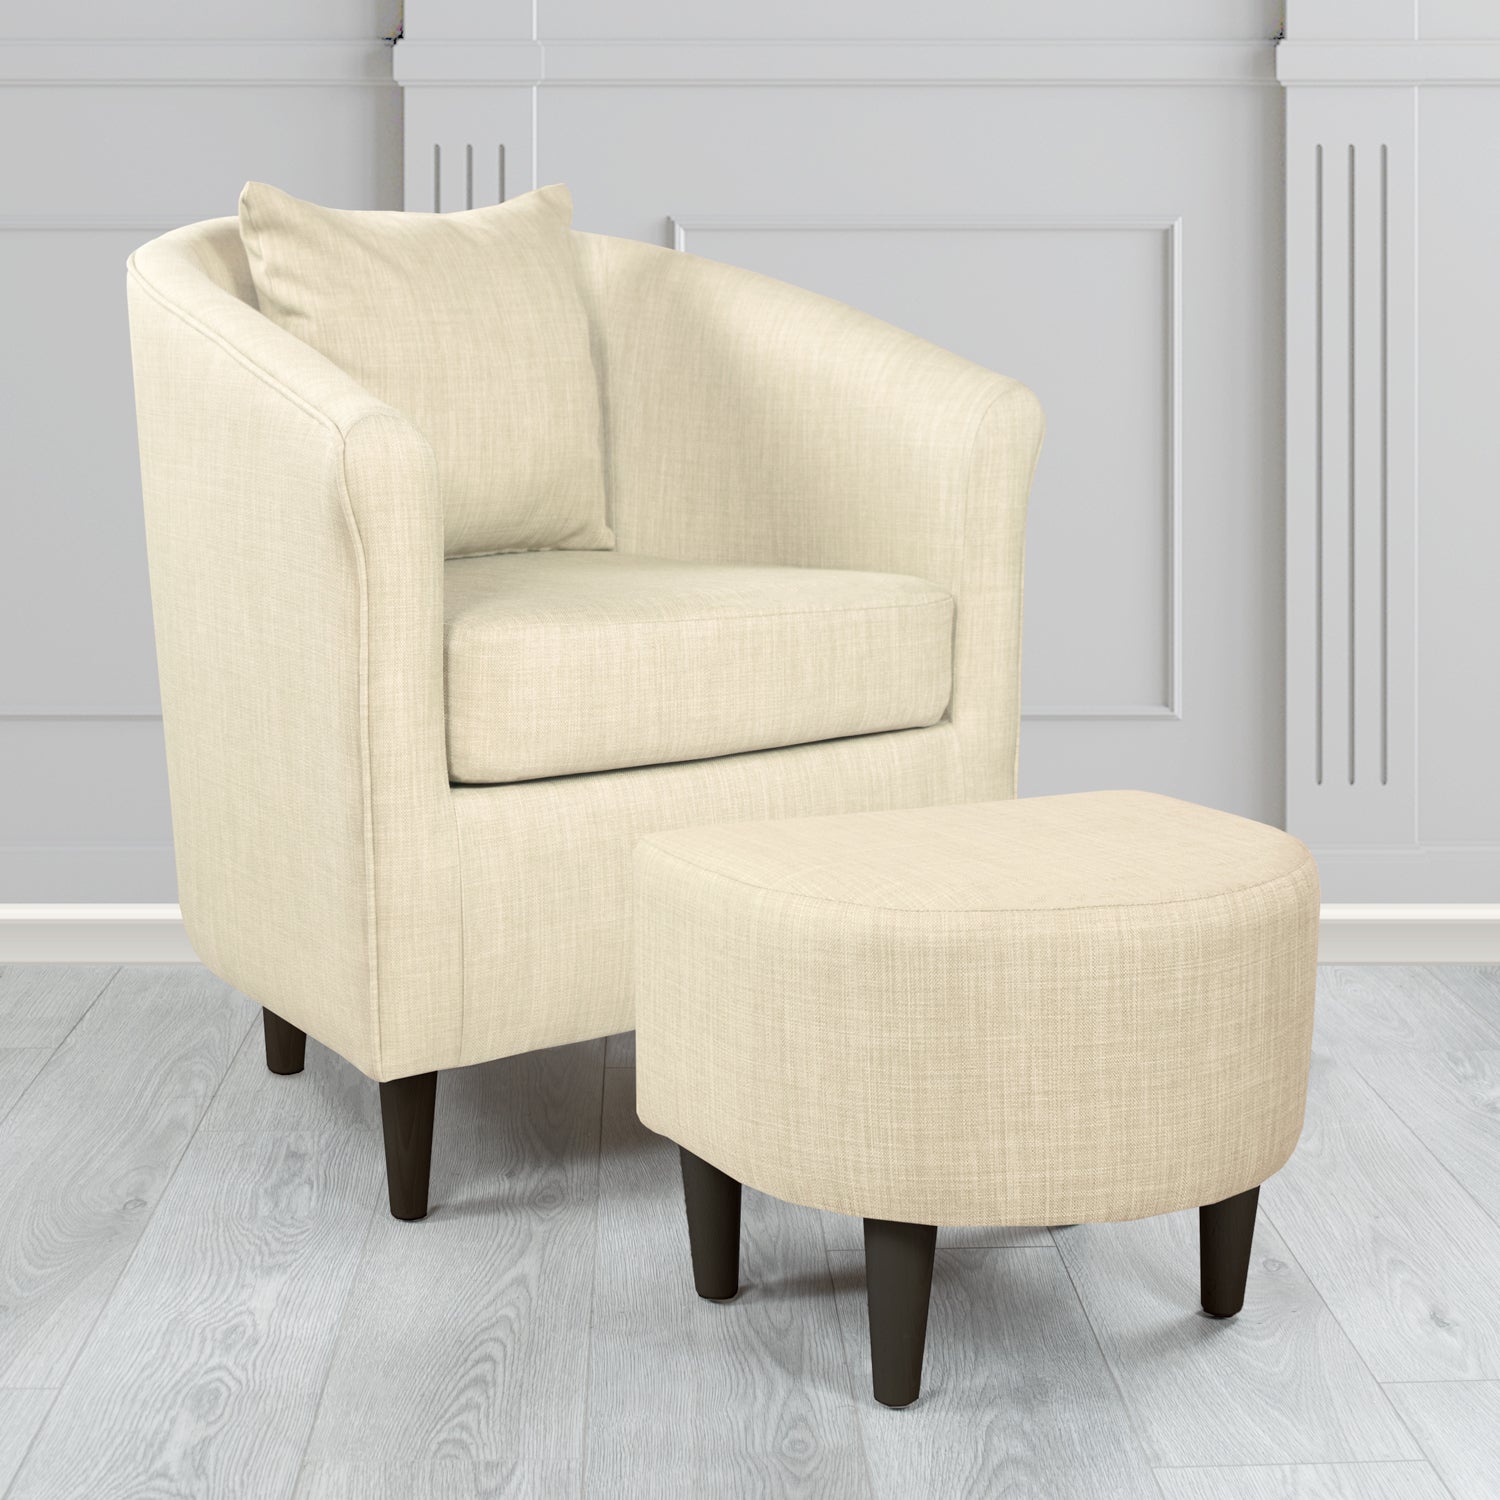 St Tropez Charles Cream Plain Linen Fabric Tub Chair & Footstool Set with Scatter Cushion - The Tub Chair Shop